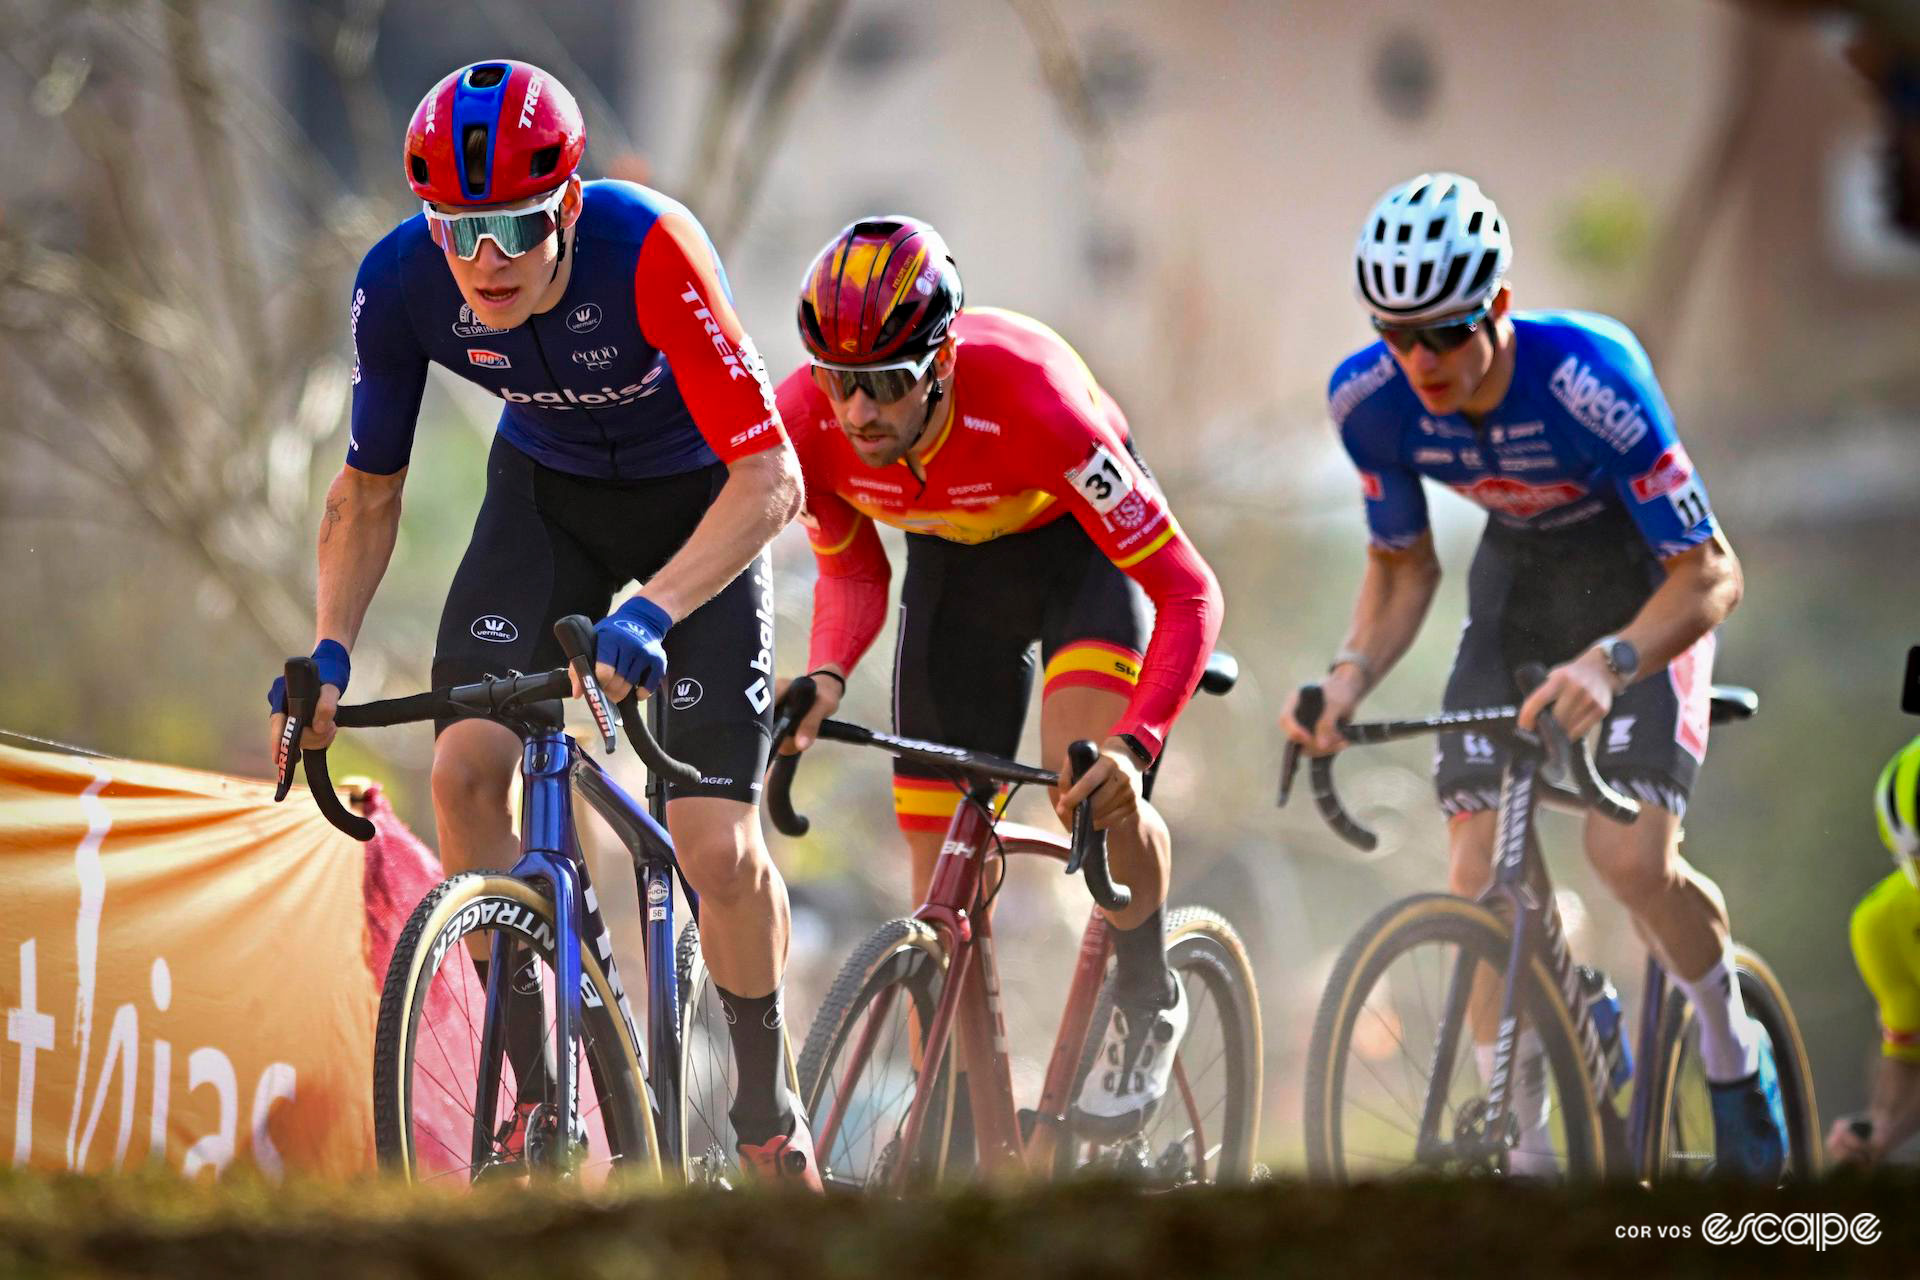 Pim Ronhaar leads a chase group during CX World Cup Benidorm.